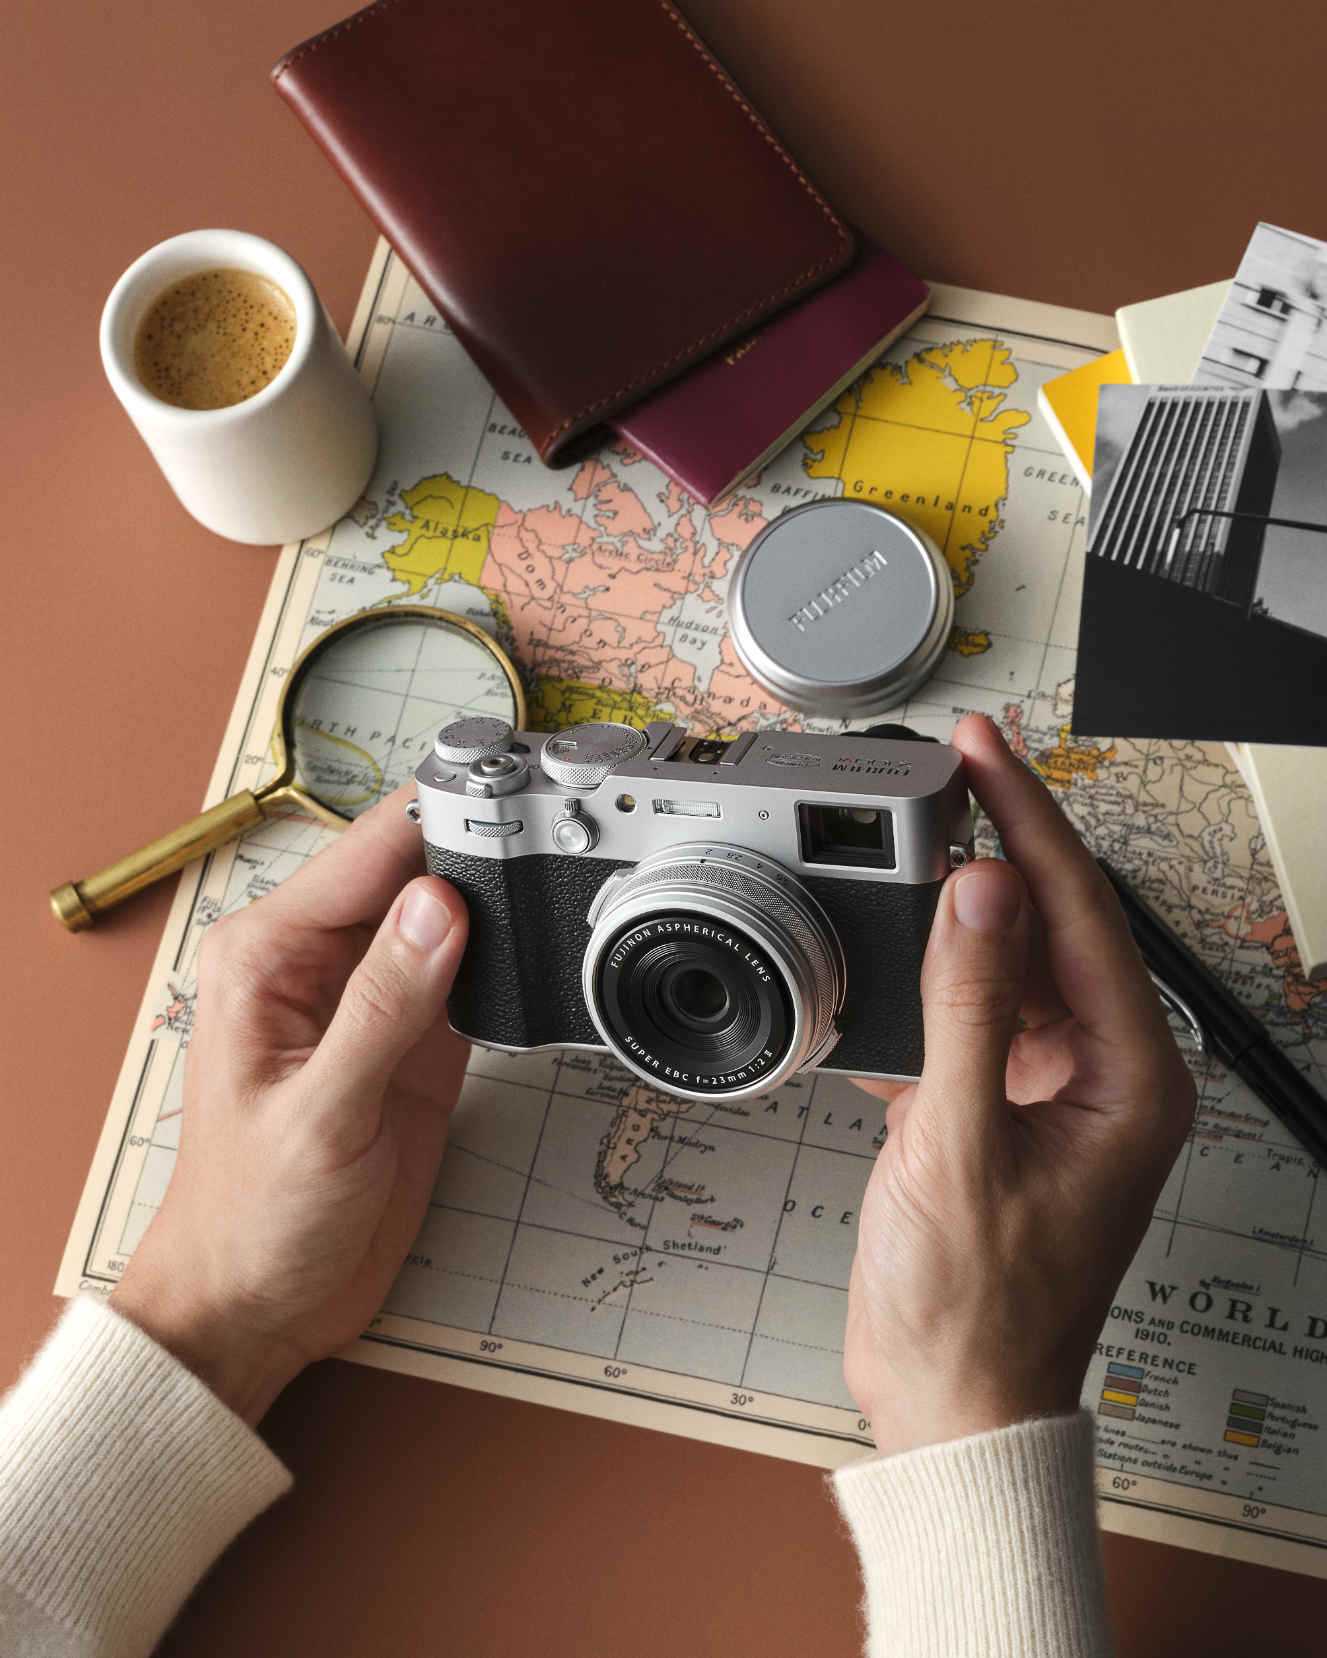 Here is the new FUJIFILM X100VI: one of a kind